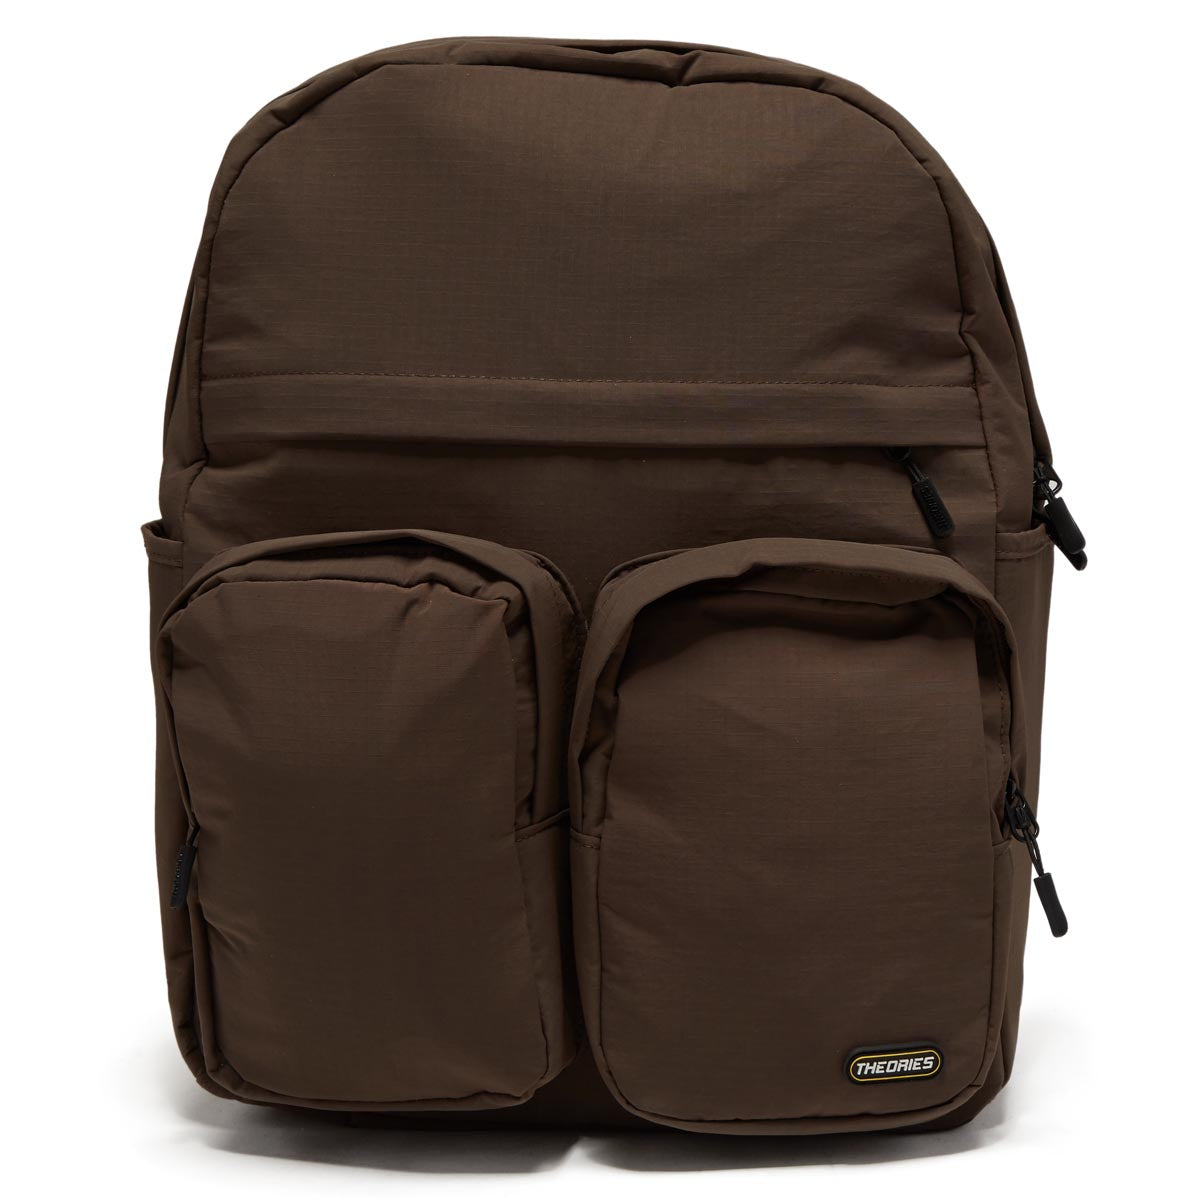 Theories Ripstop Trail Backpack - Brown image 1